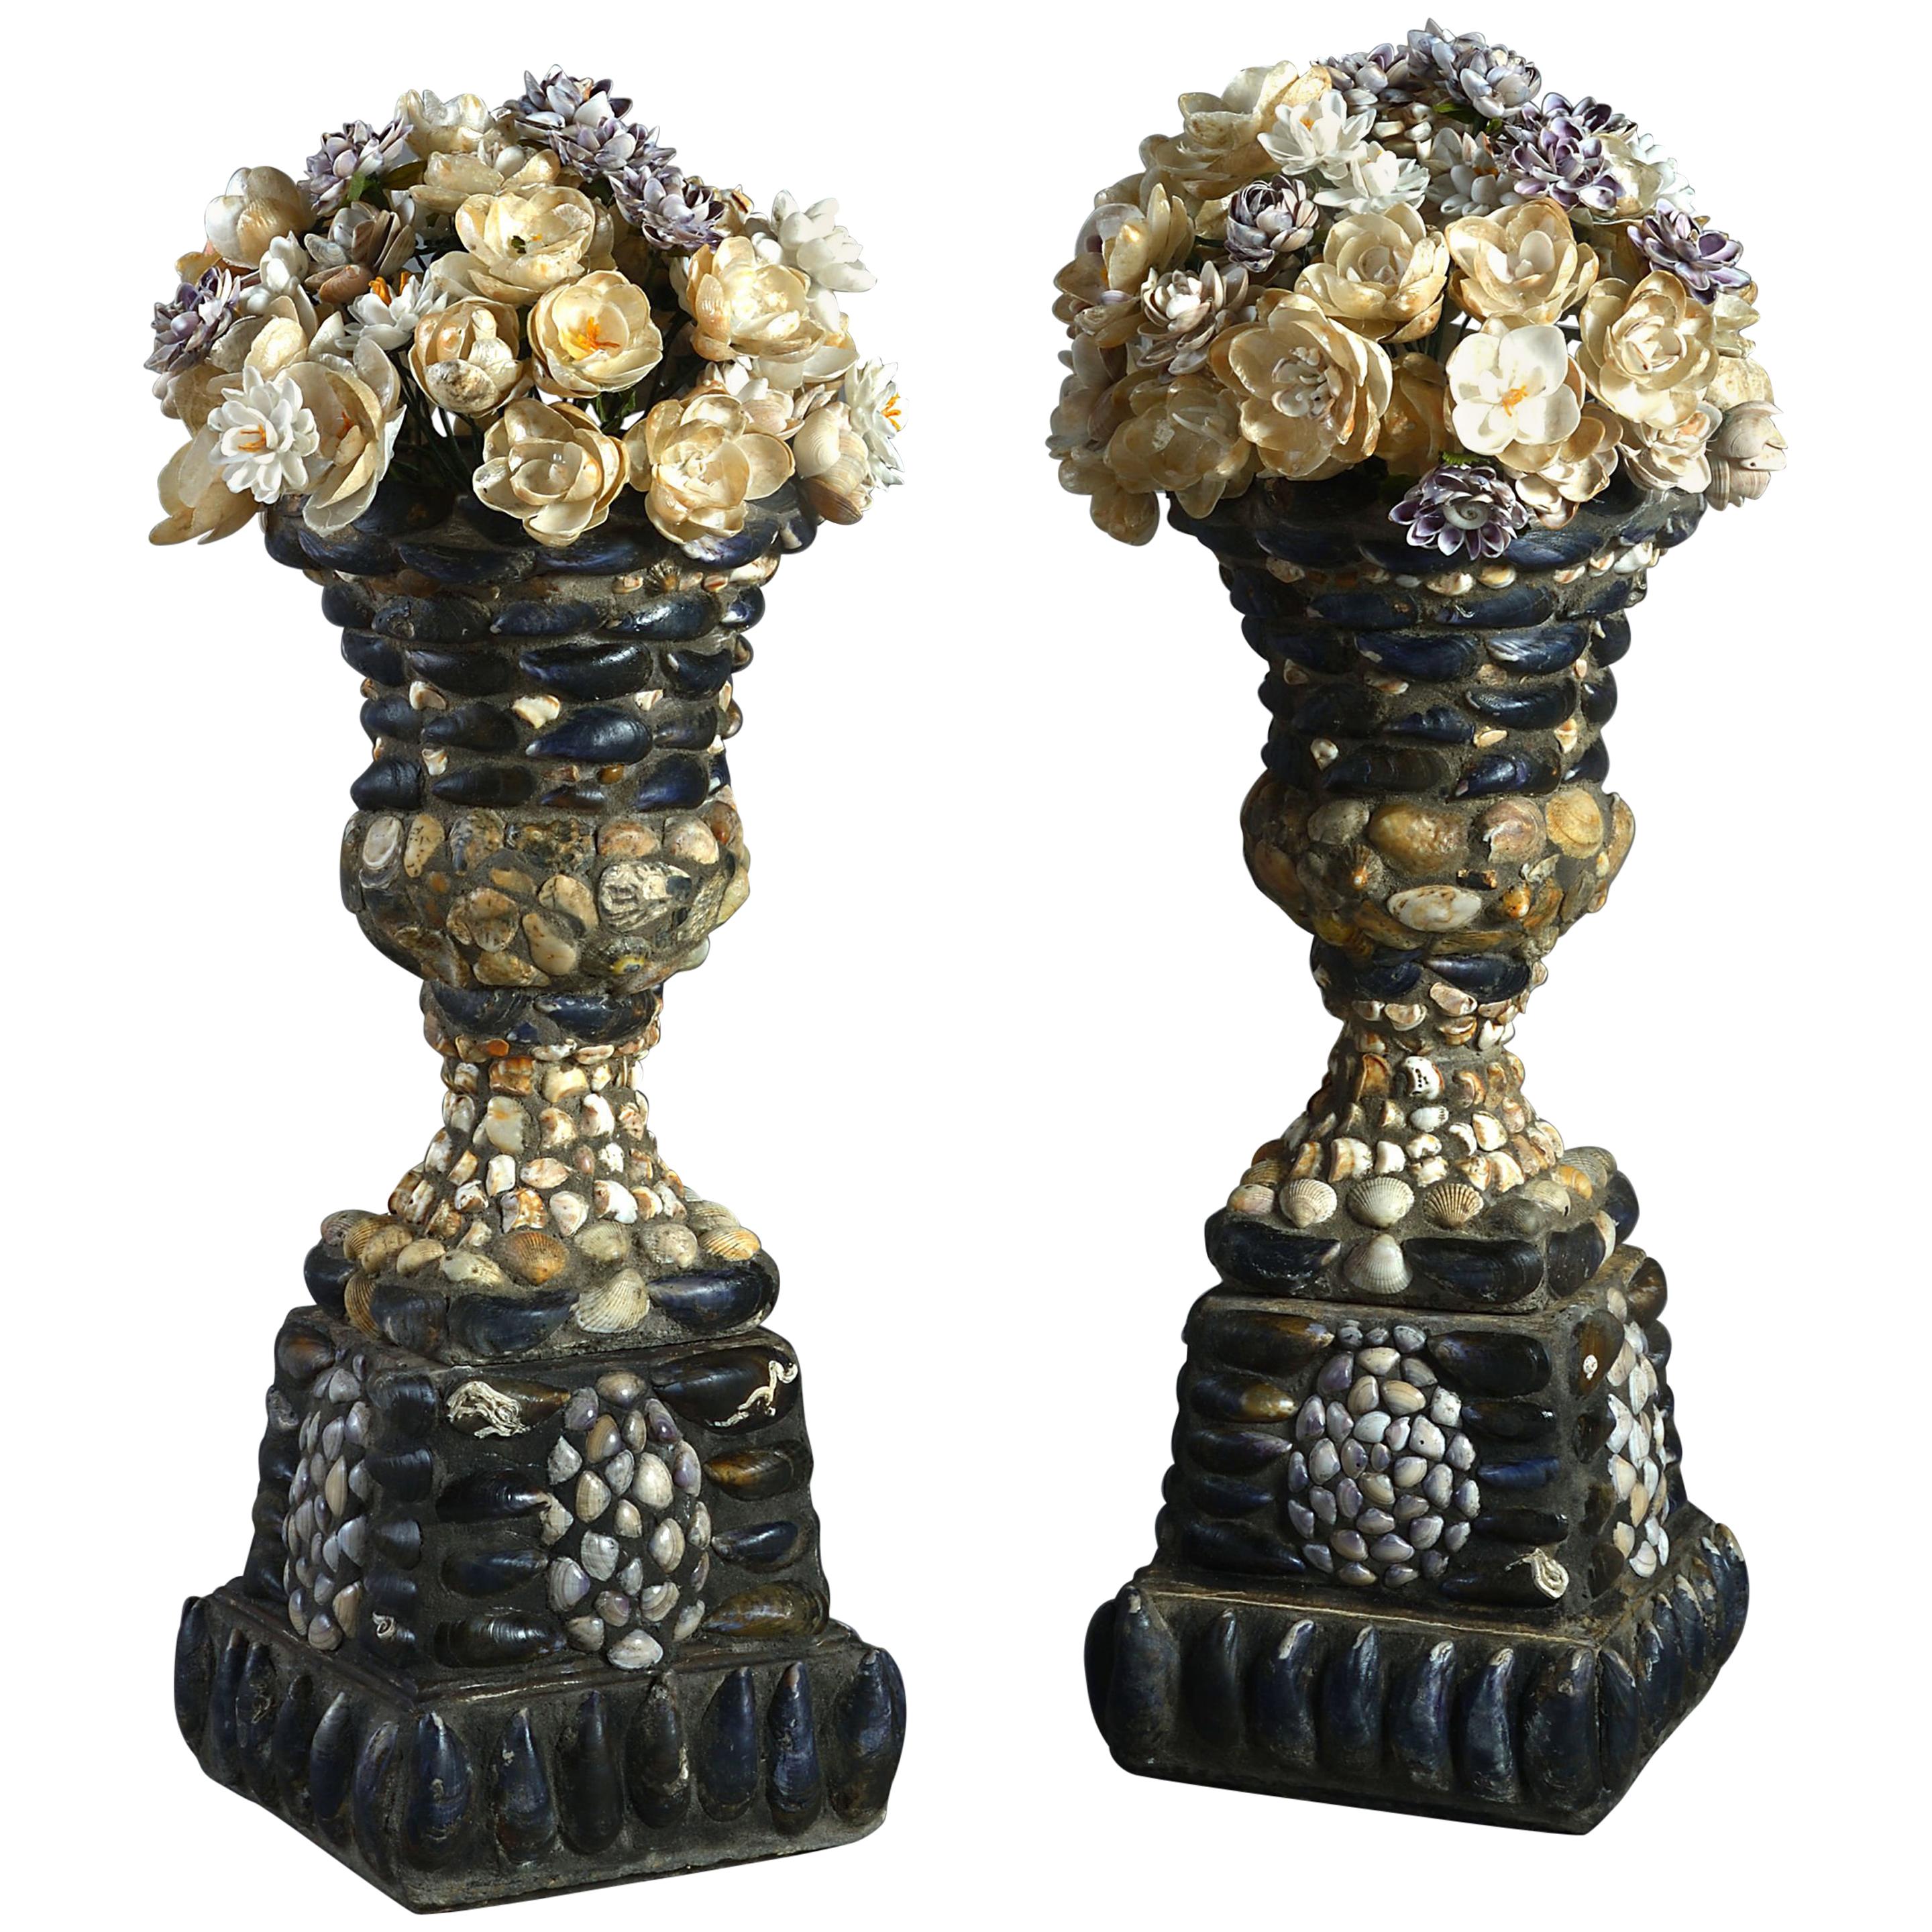 Pair of Shell Encrusted Urns on Plinths